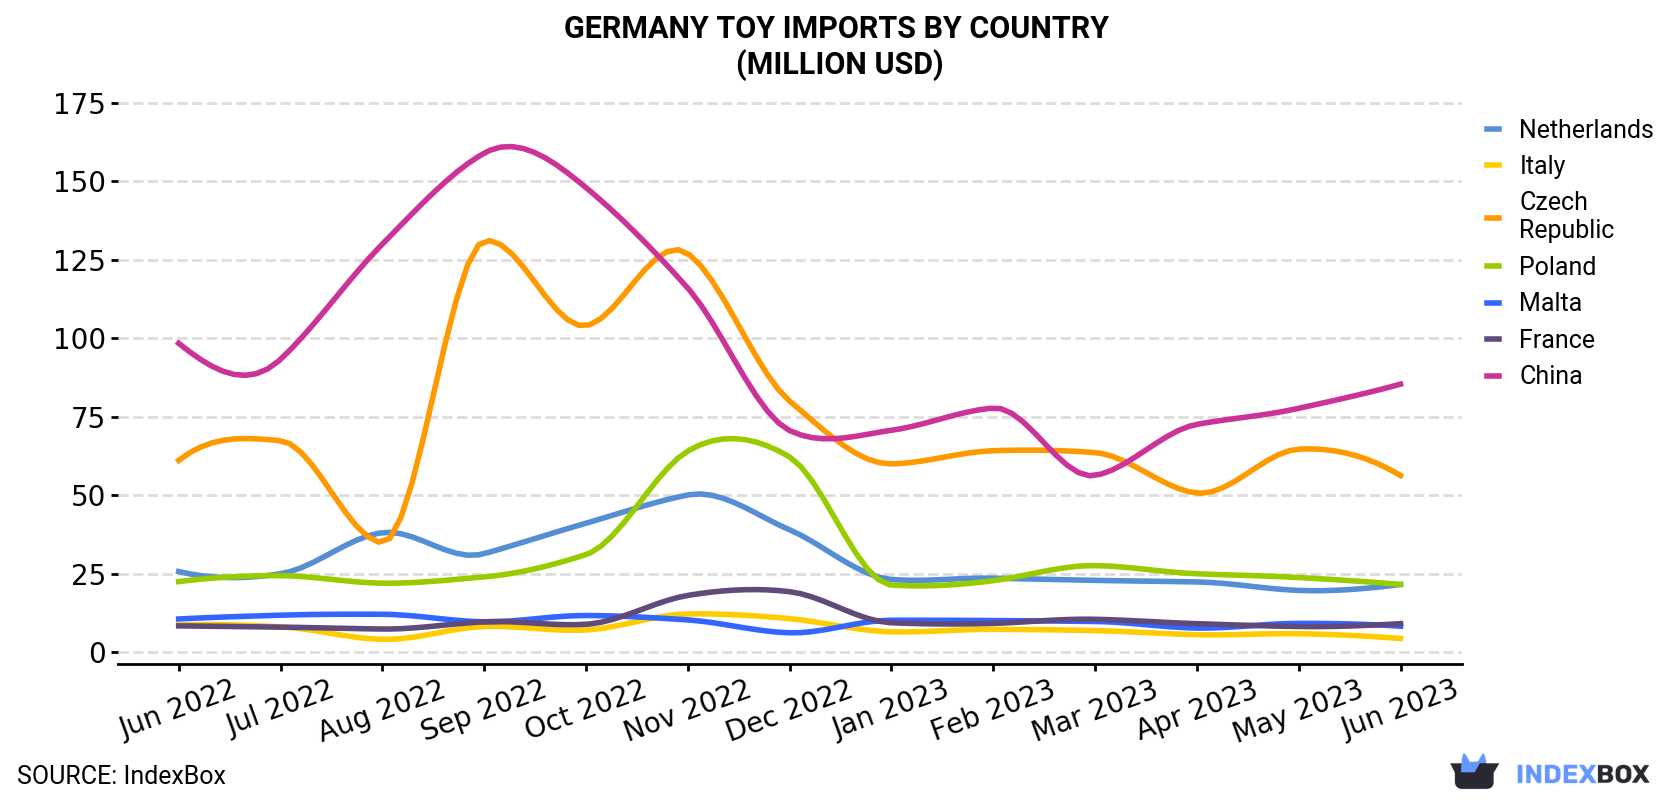 Germany Toy Imports By Country (Million USD)